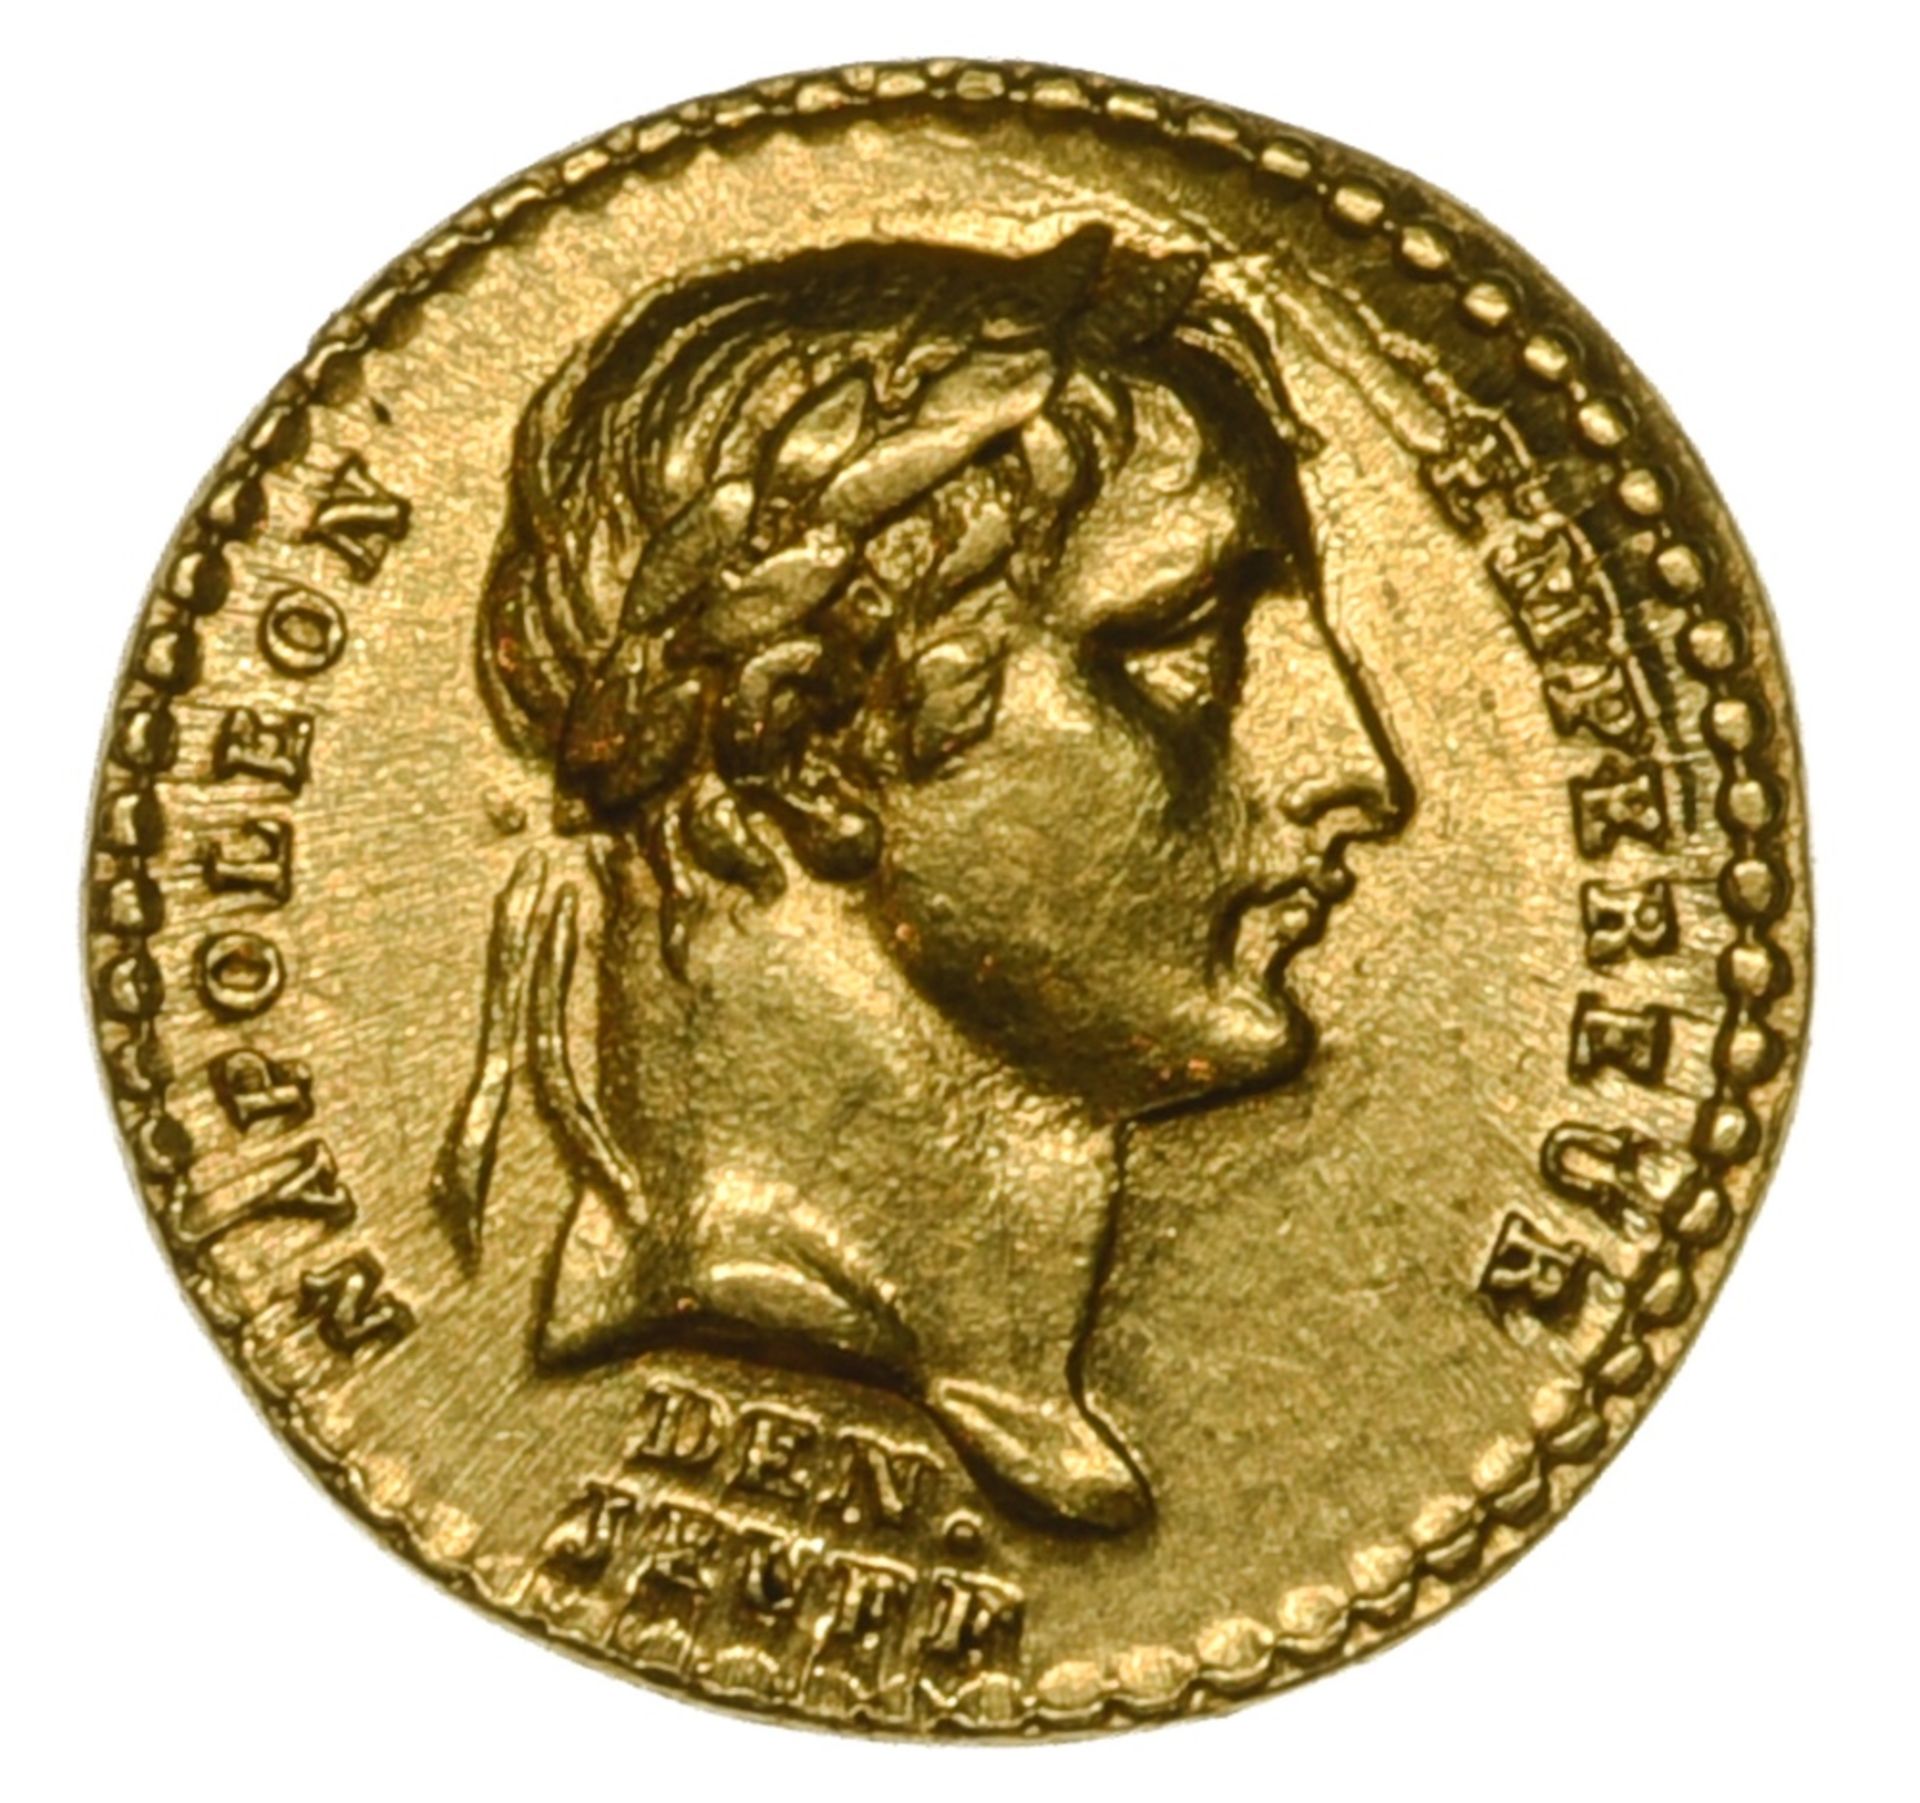 France Napoleon I (1804-1814), small coronation medal, 1.90g, 13mm, in gold, AN XIII, by Denon and - Image 2 of 3